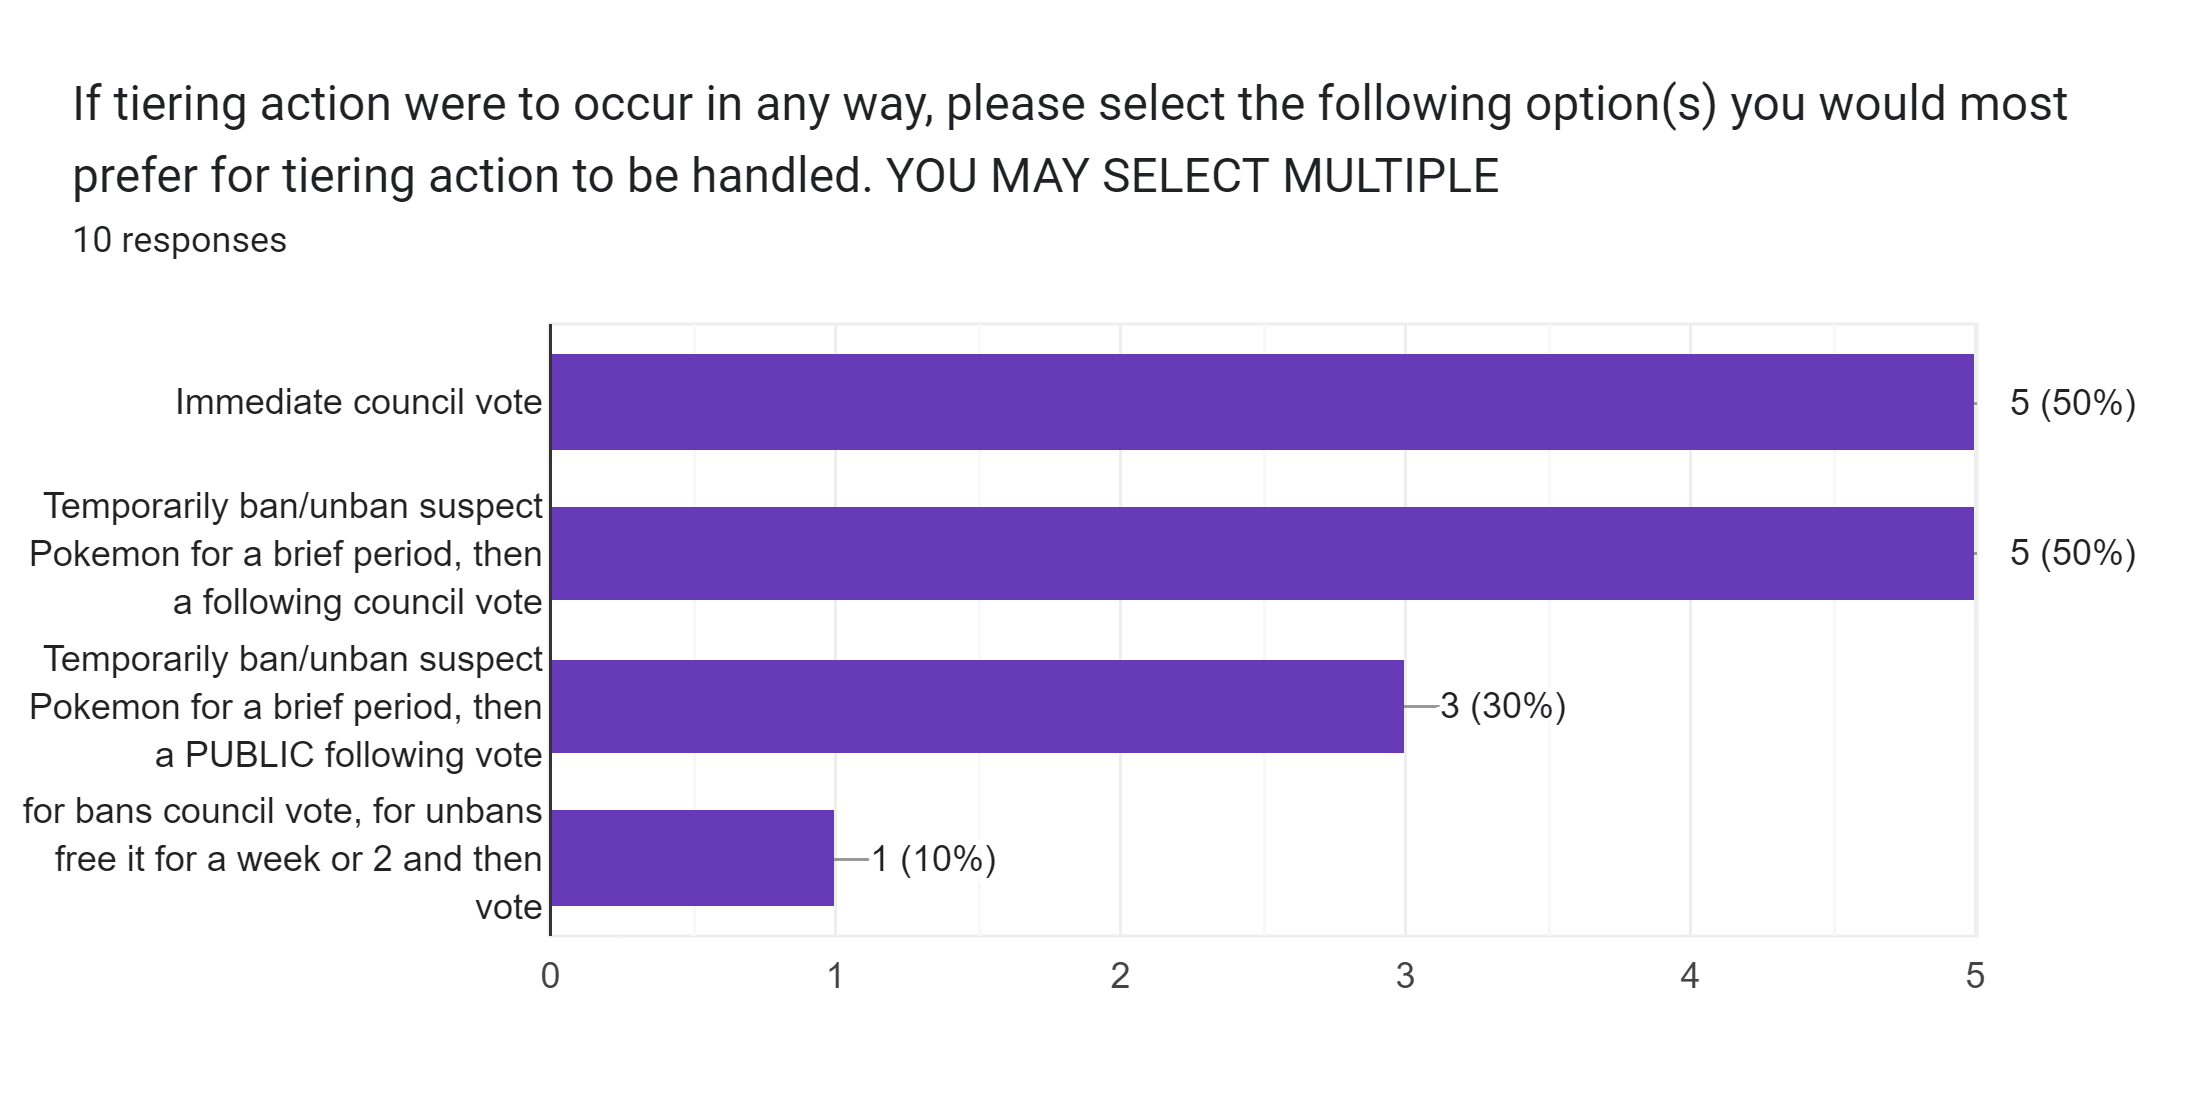 Forms response chart. Question title: If tiering action were to occur in any way, please select the following option(s) you would most prefer for tiering action to be handled. YOU MAY SELECT MULTIPLE. Number of responses: 10 responses.